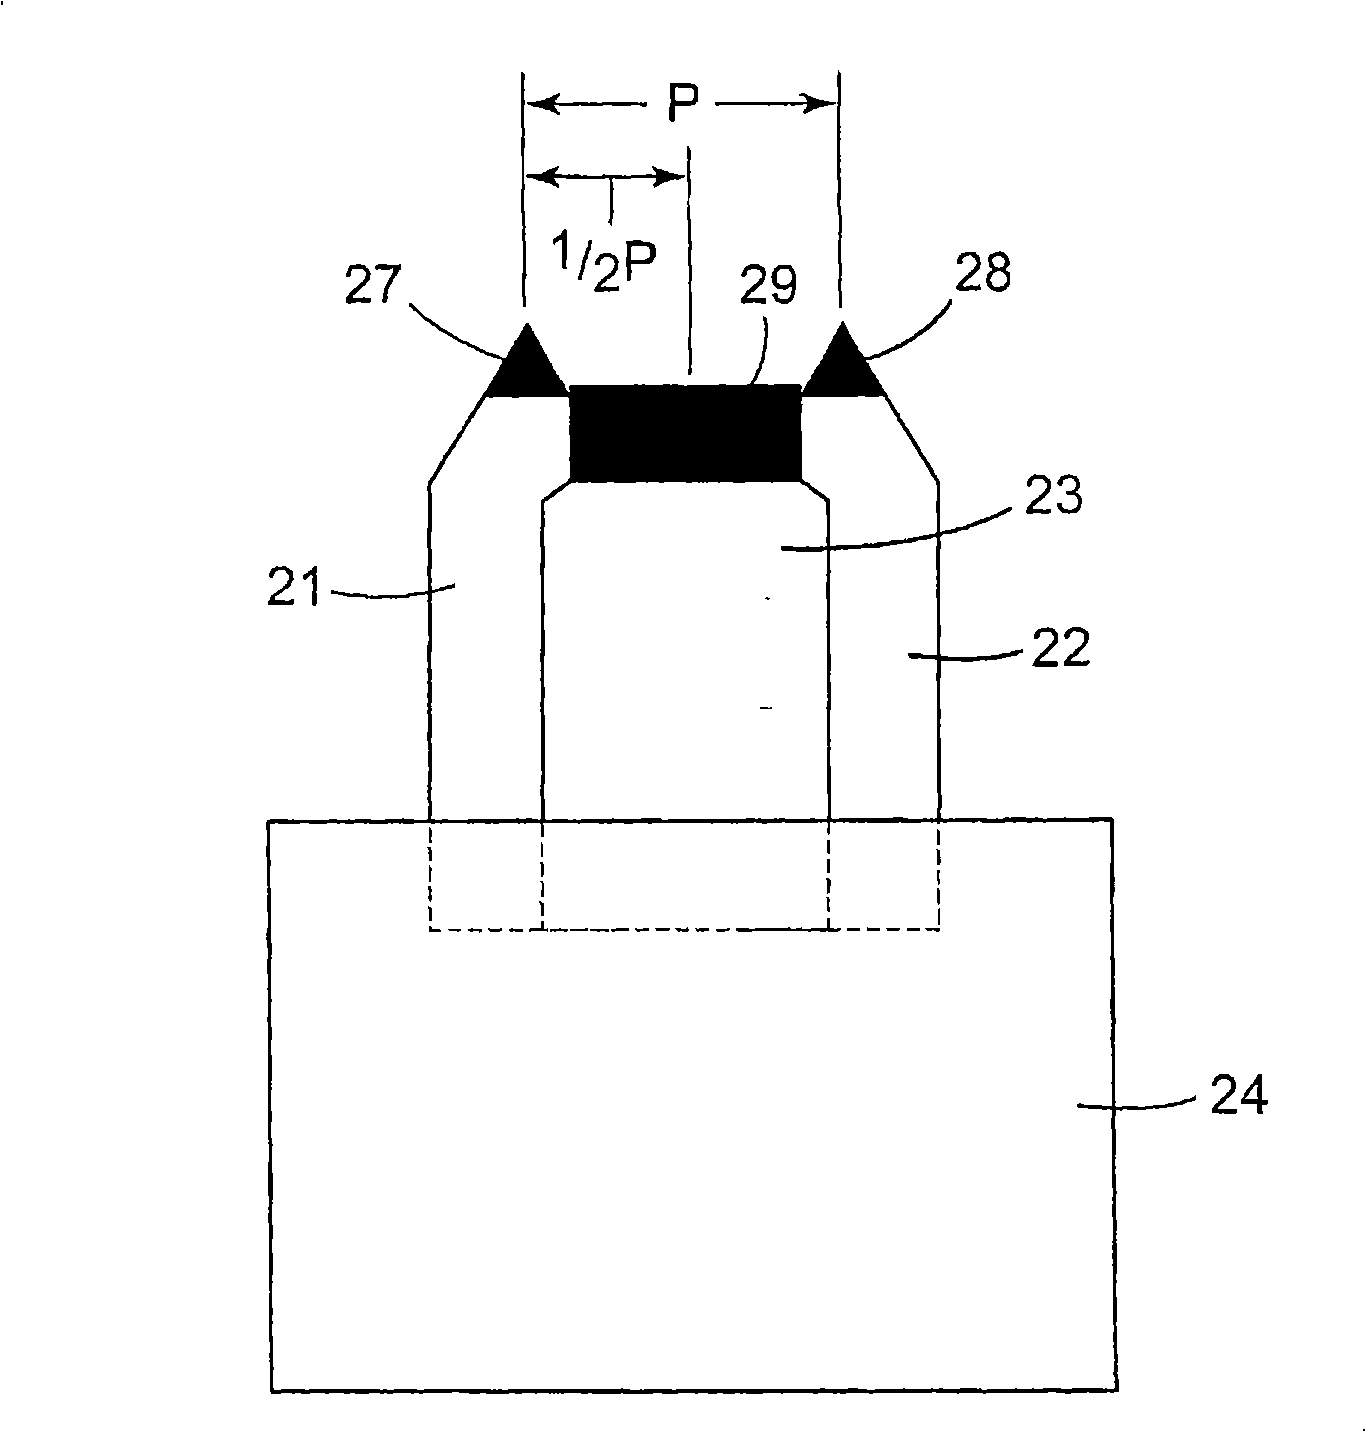 Cutting tool assembly including diamond cutting tips at half-pitch spacing for land feature creation